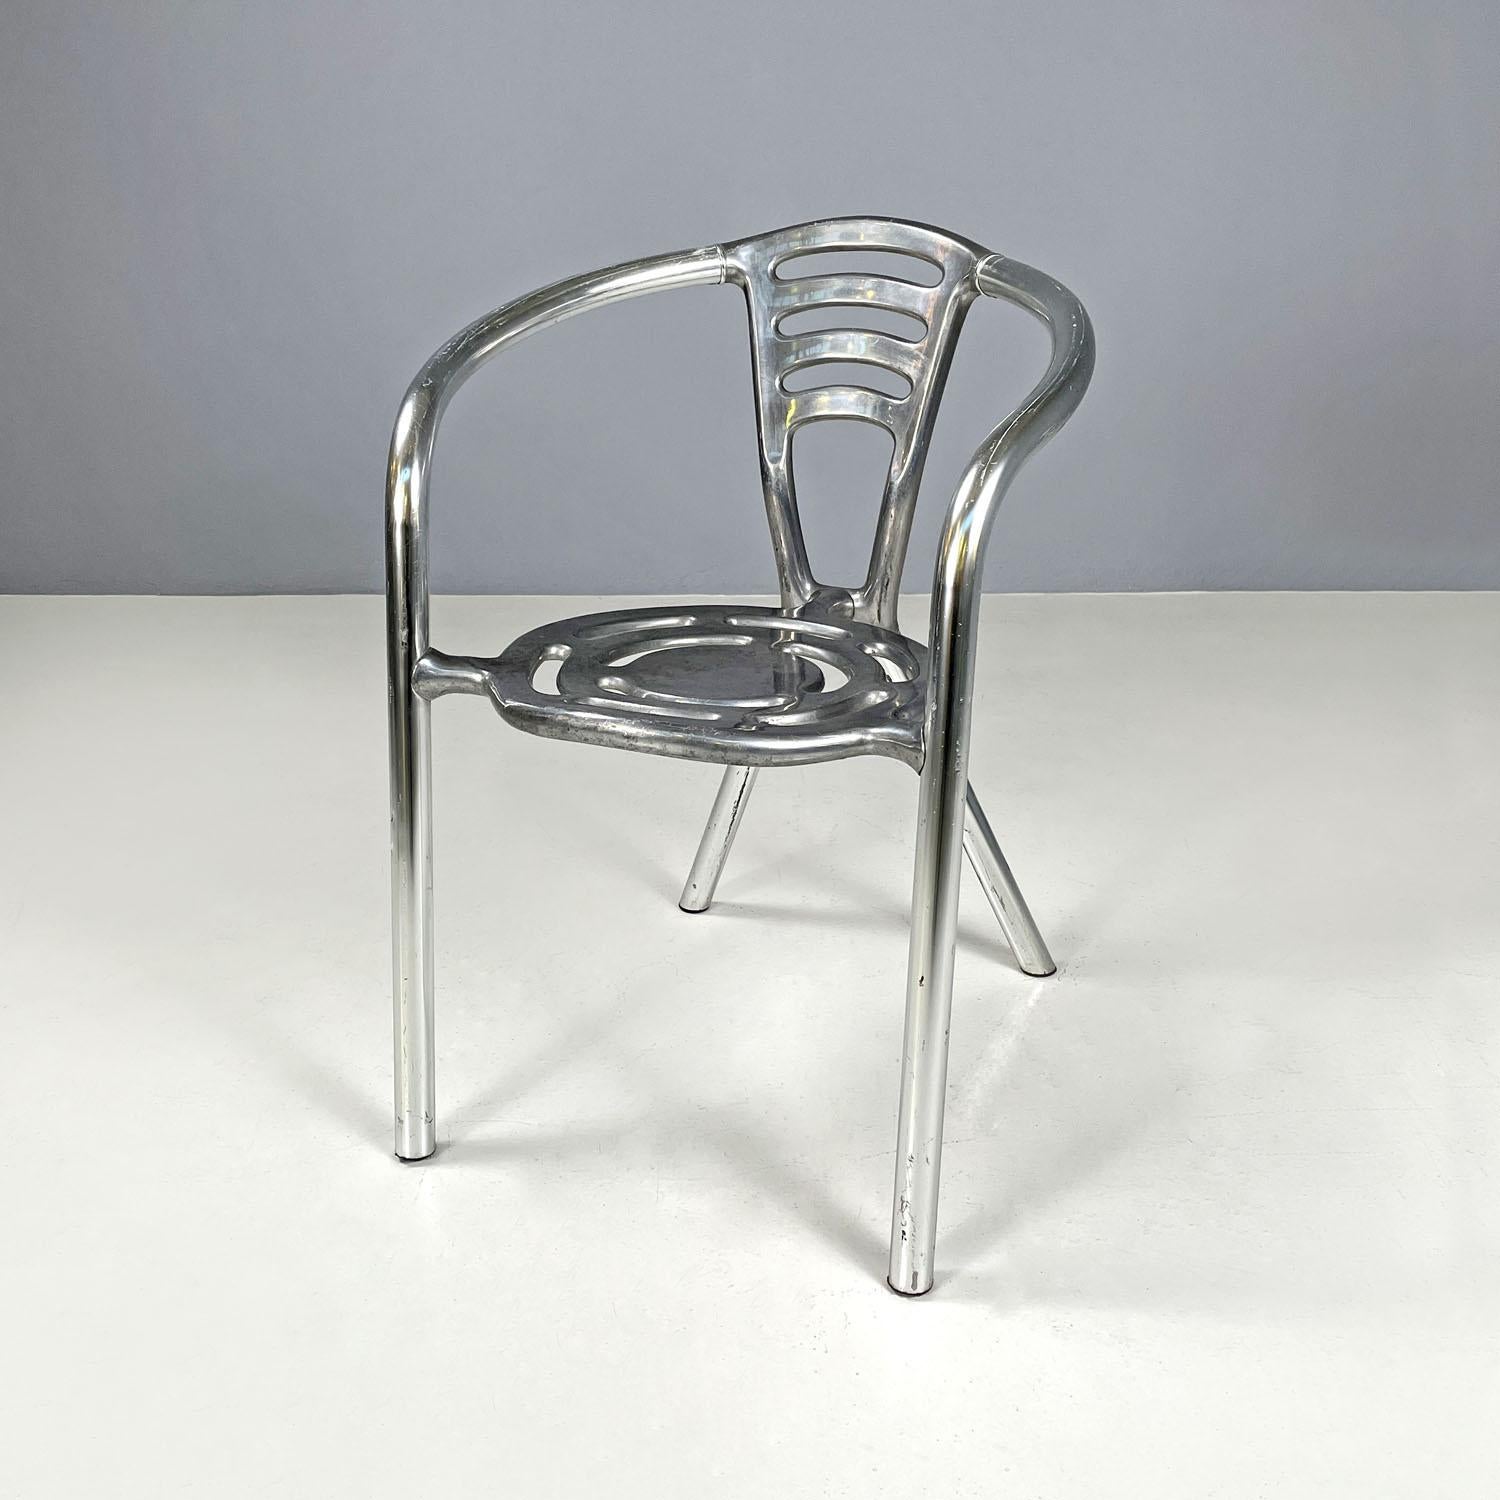 Italian postmodern aluminum chair Ferdinand Alexander Porsche for Ycami, 1990s
Aluminum chair with round seat. The seat and backrest have decorative perforations with curved lines. The structure of the armrests and legs is made of an aluminum tube.